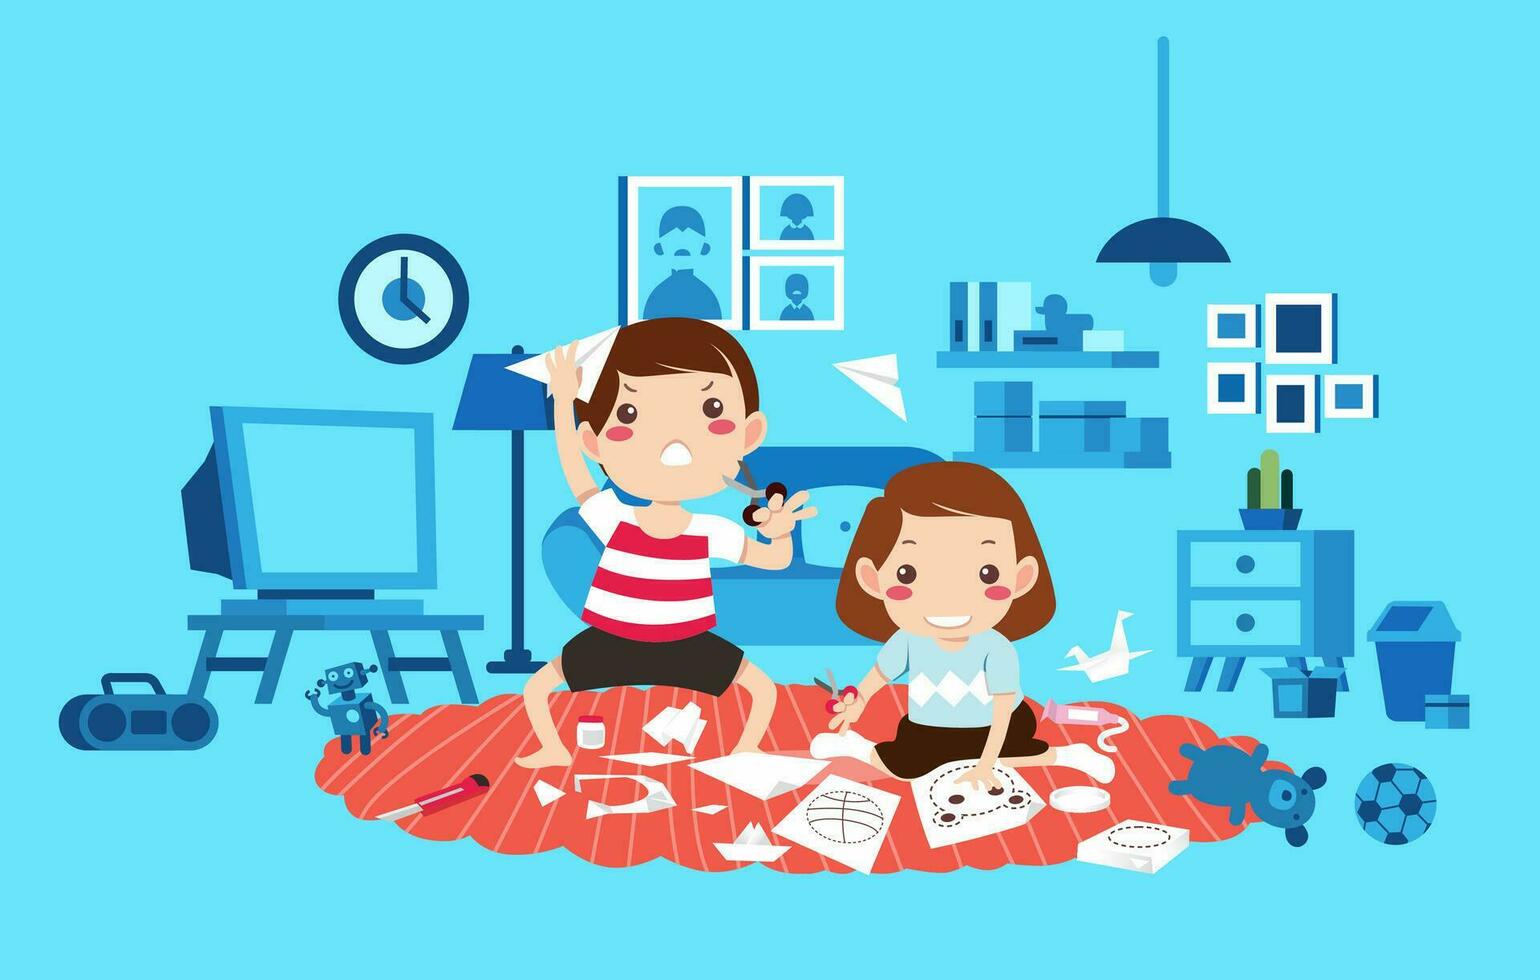 two children boy and girl playing in the living room full of toys, the kids cutting paper and making paper plane illustration vector